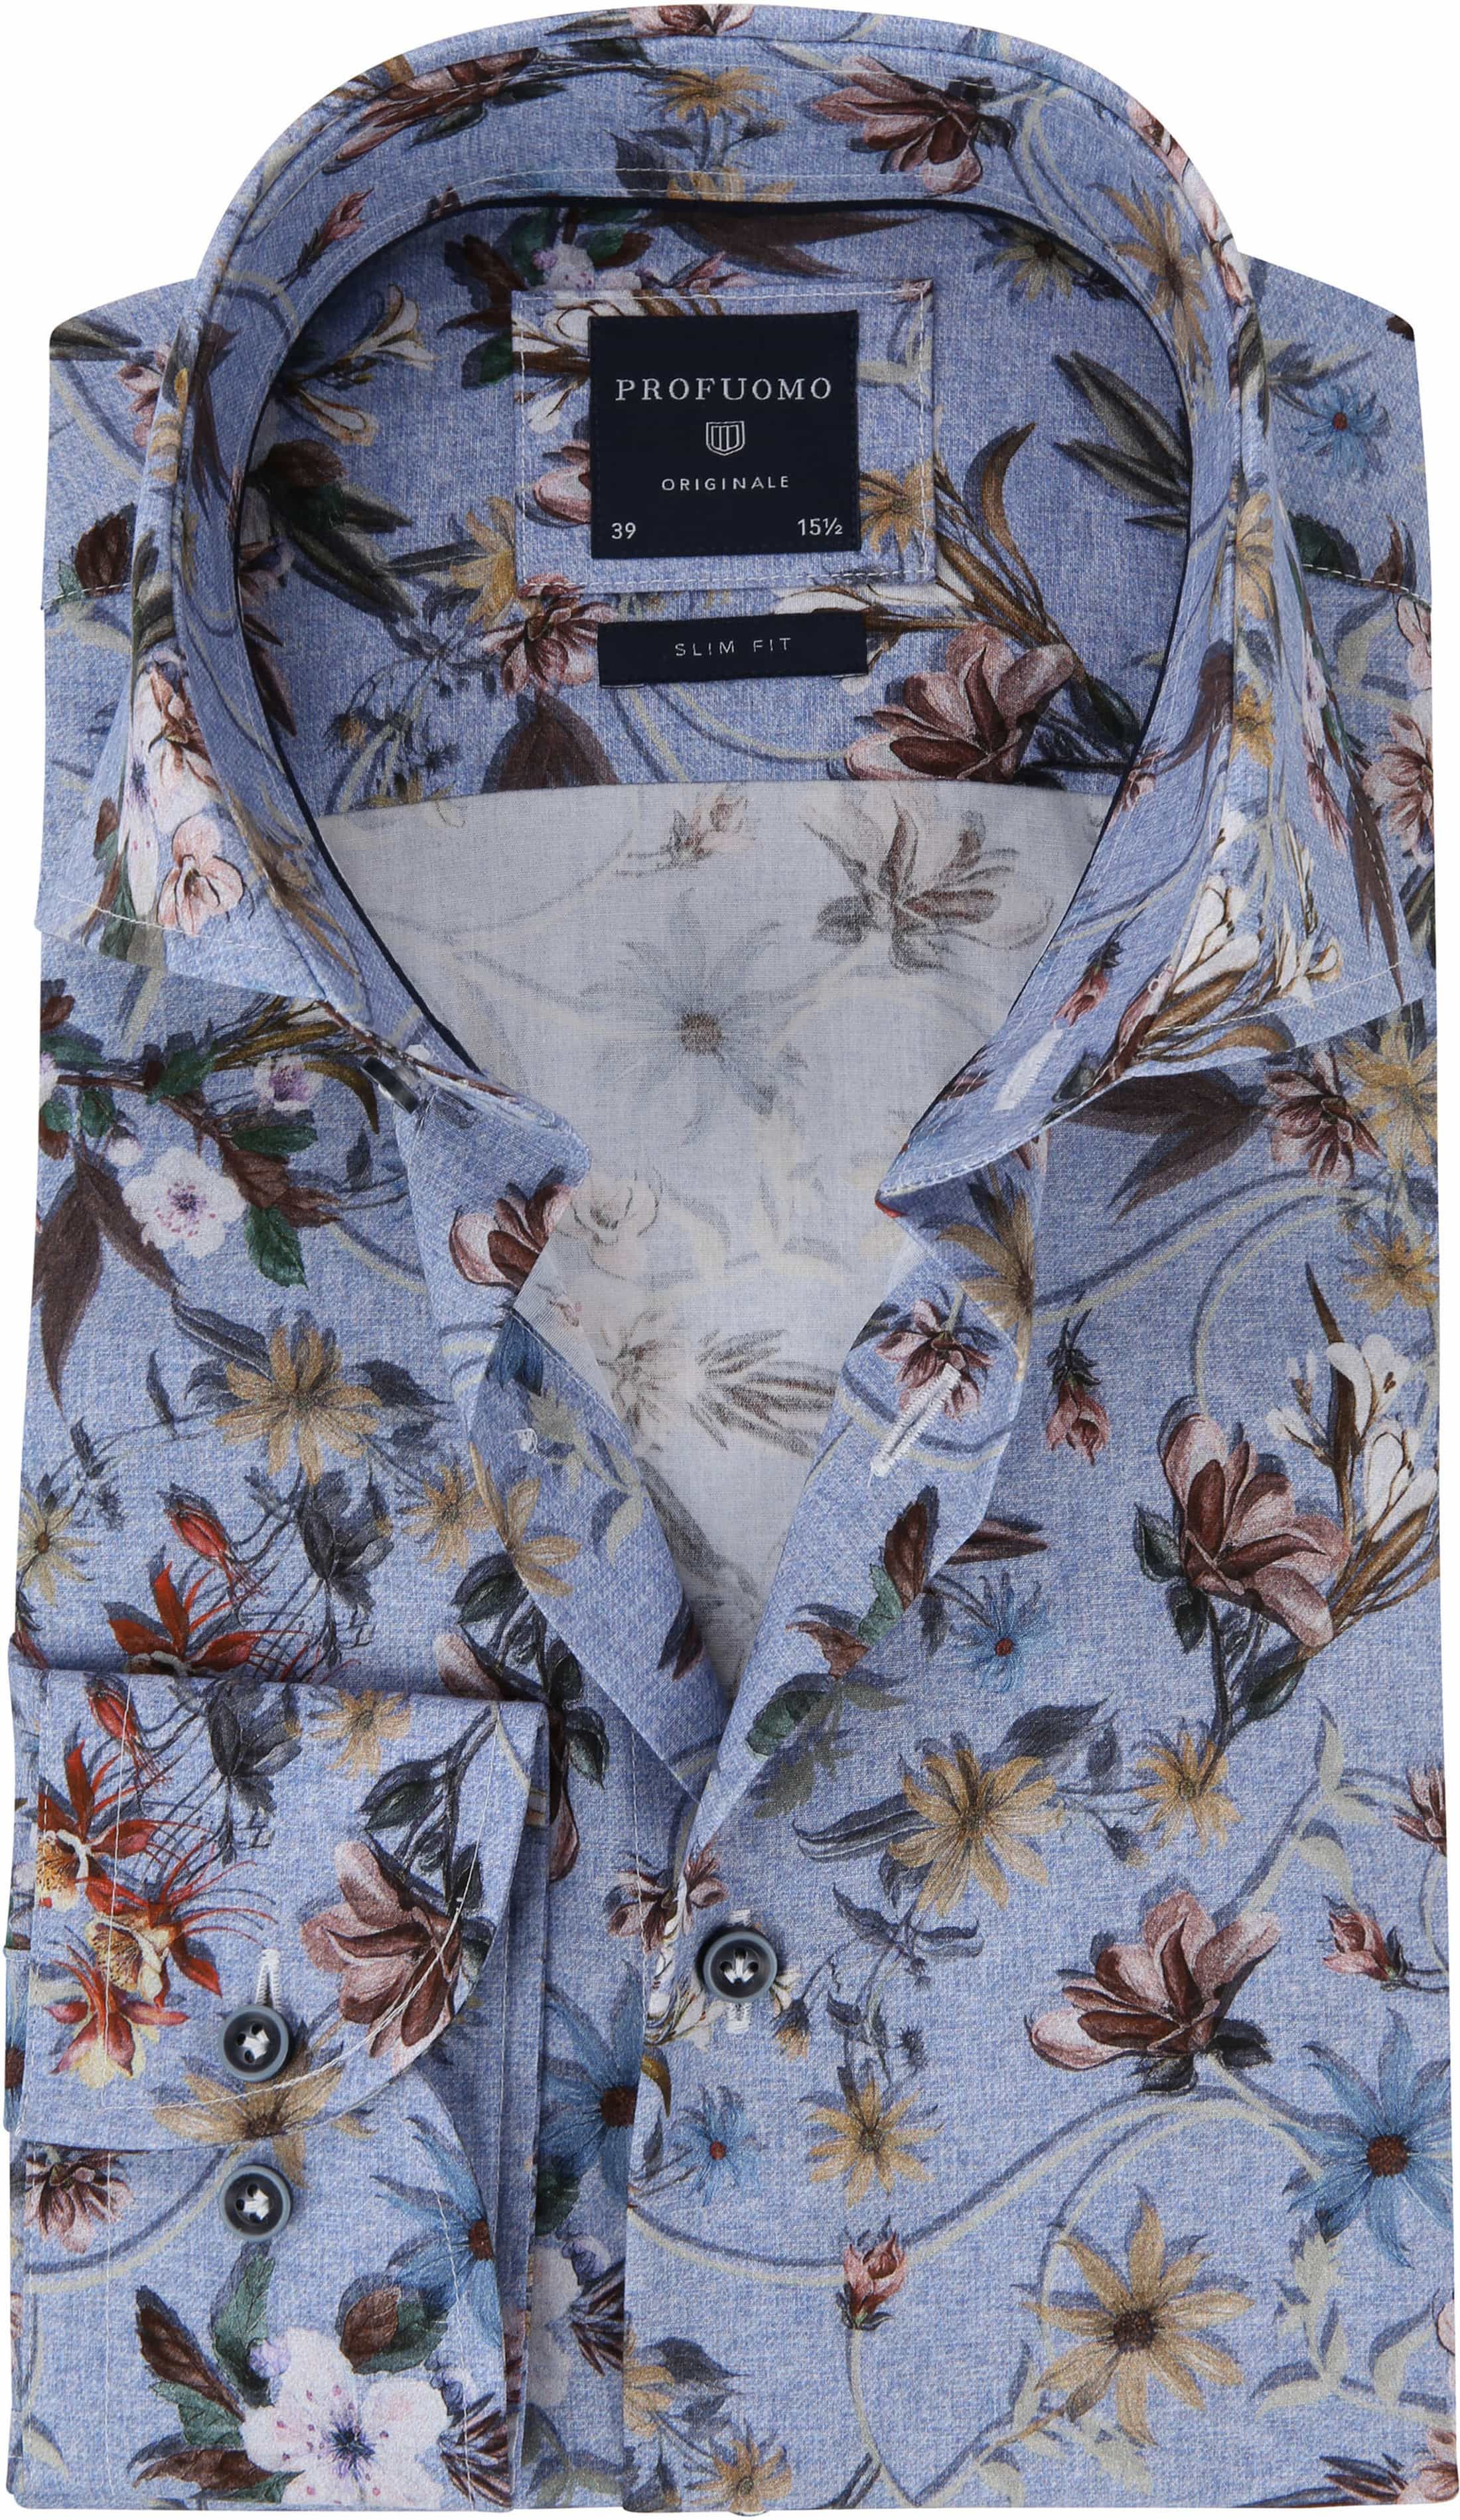 Profuomo Shirt Flowers Blue size 14.5